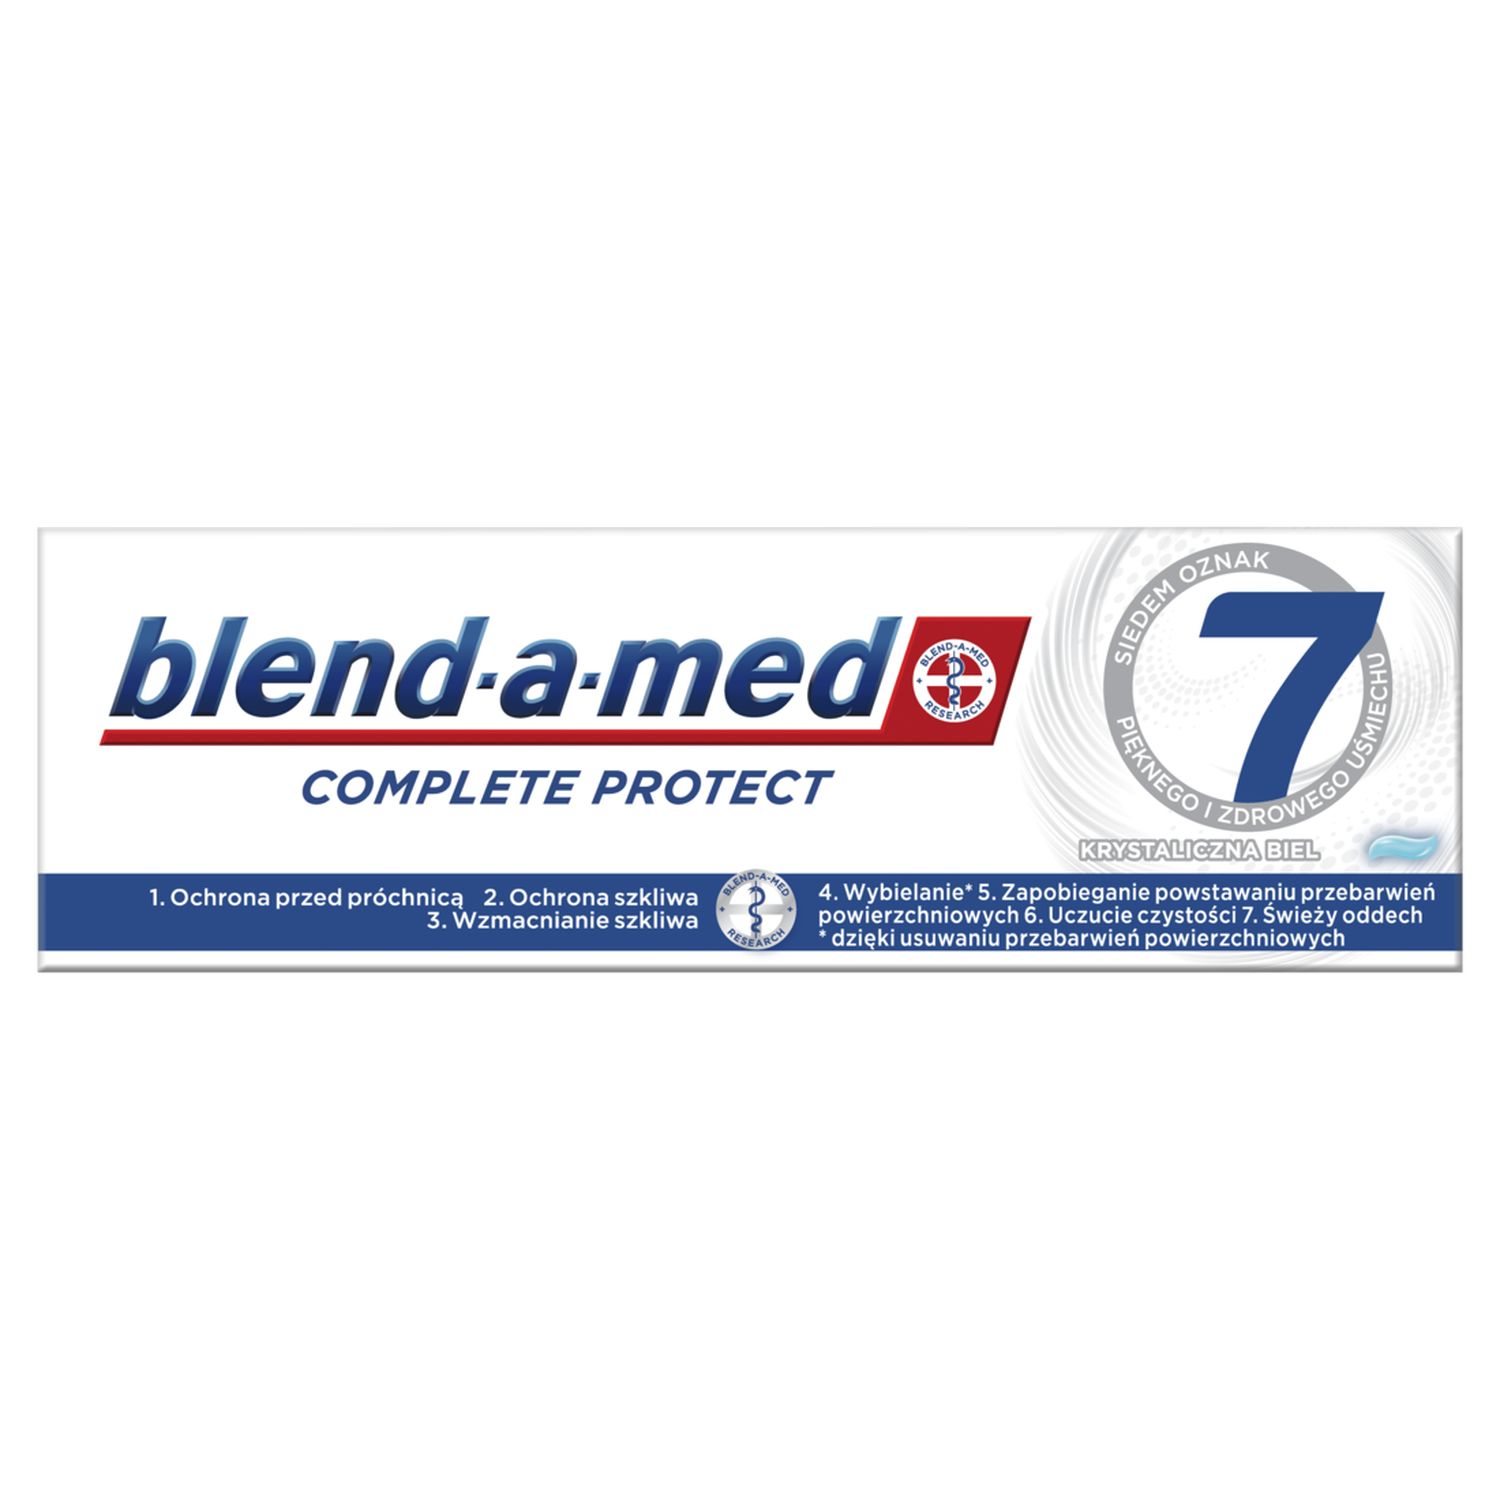 Зубна паста Blend-a-med Complete Protect 7 Кришталева білизна 75 мл - фото 3